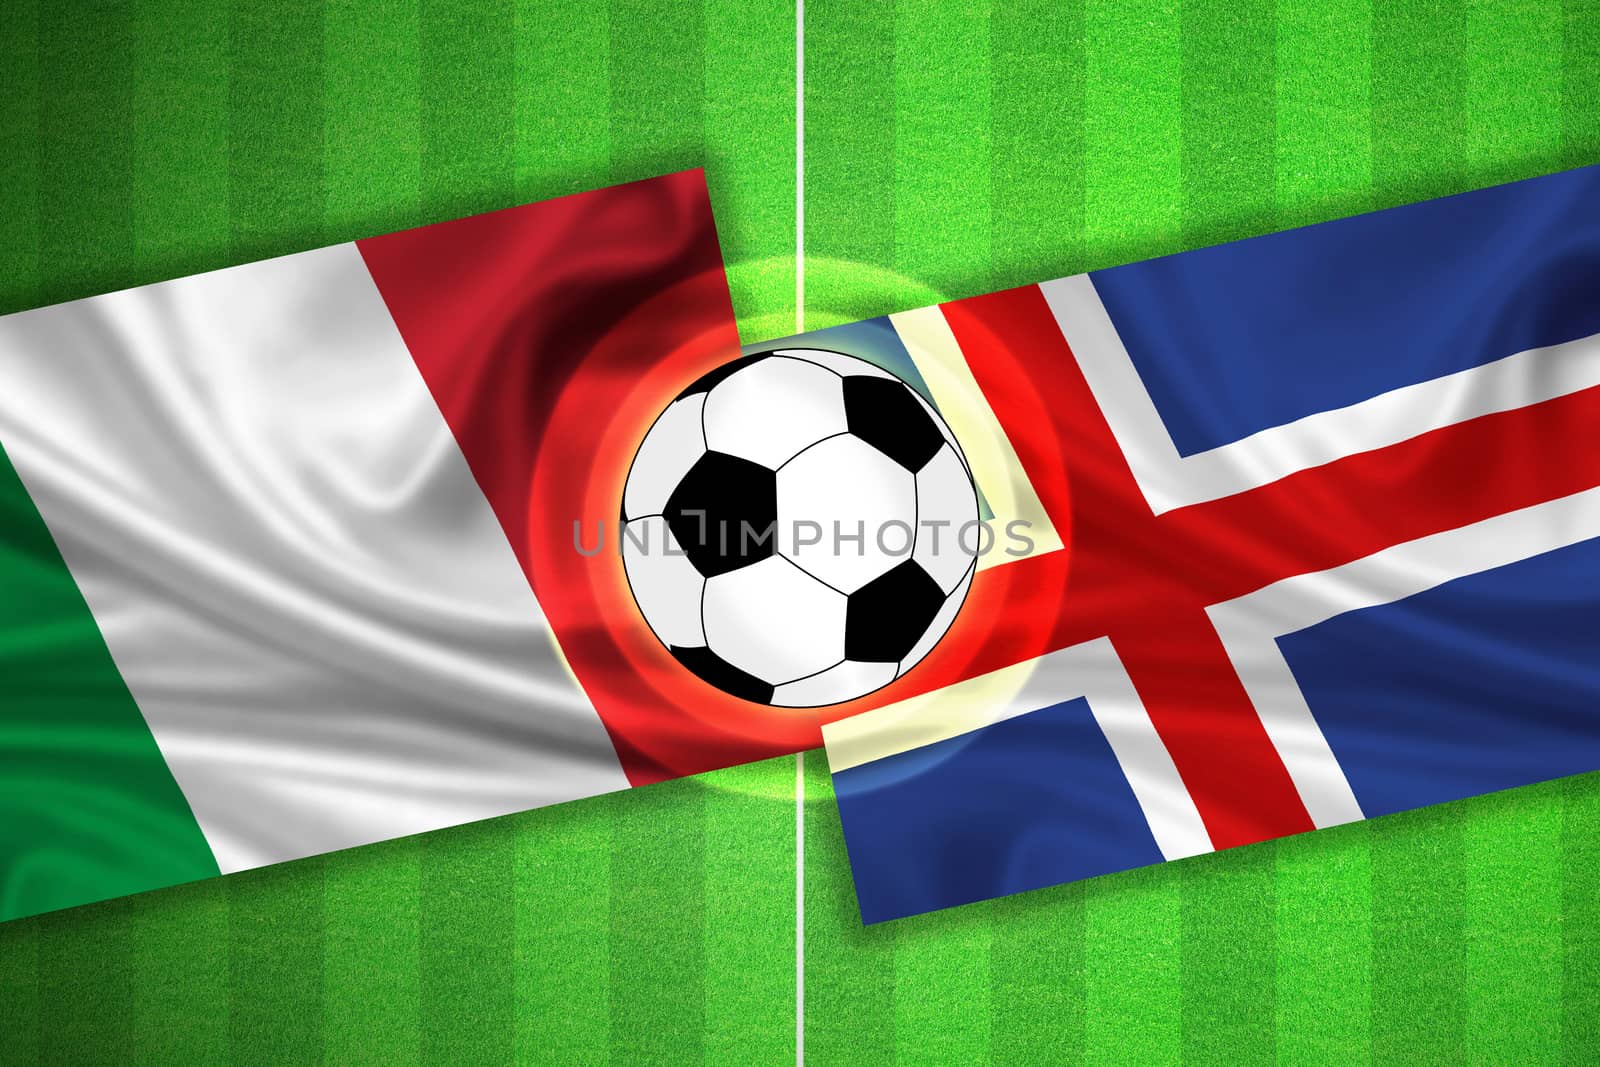 green Soccer / Football field with stripes and flags of italy - iceland, and ball.